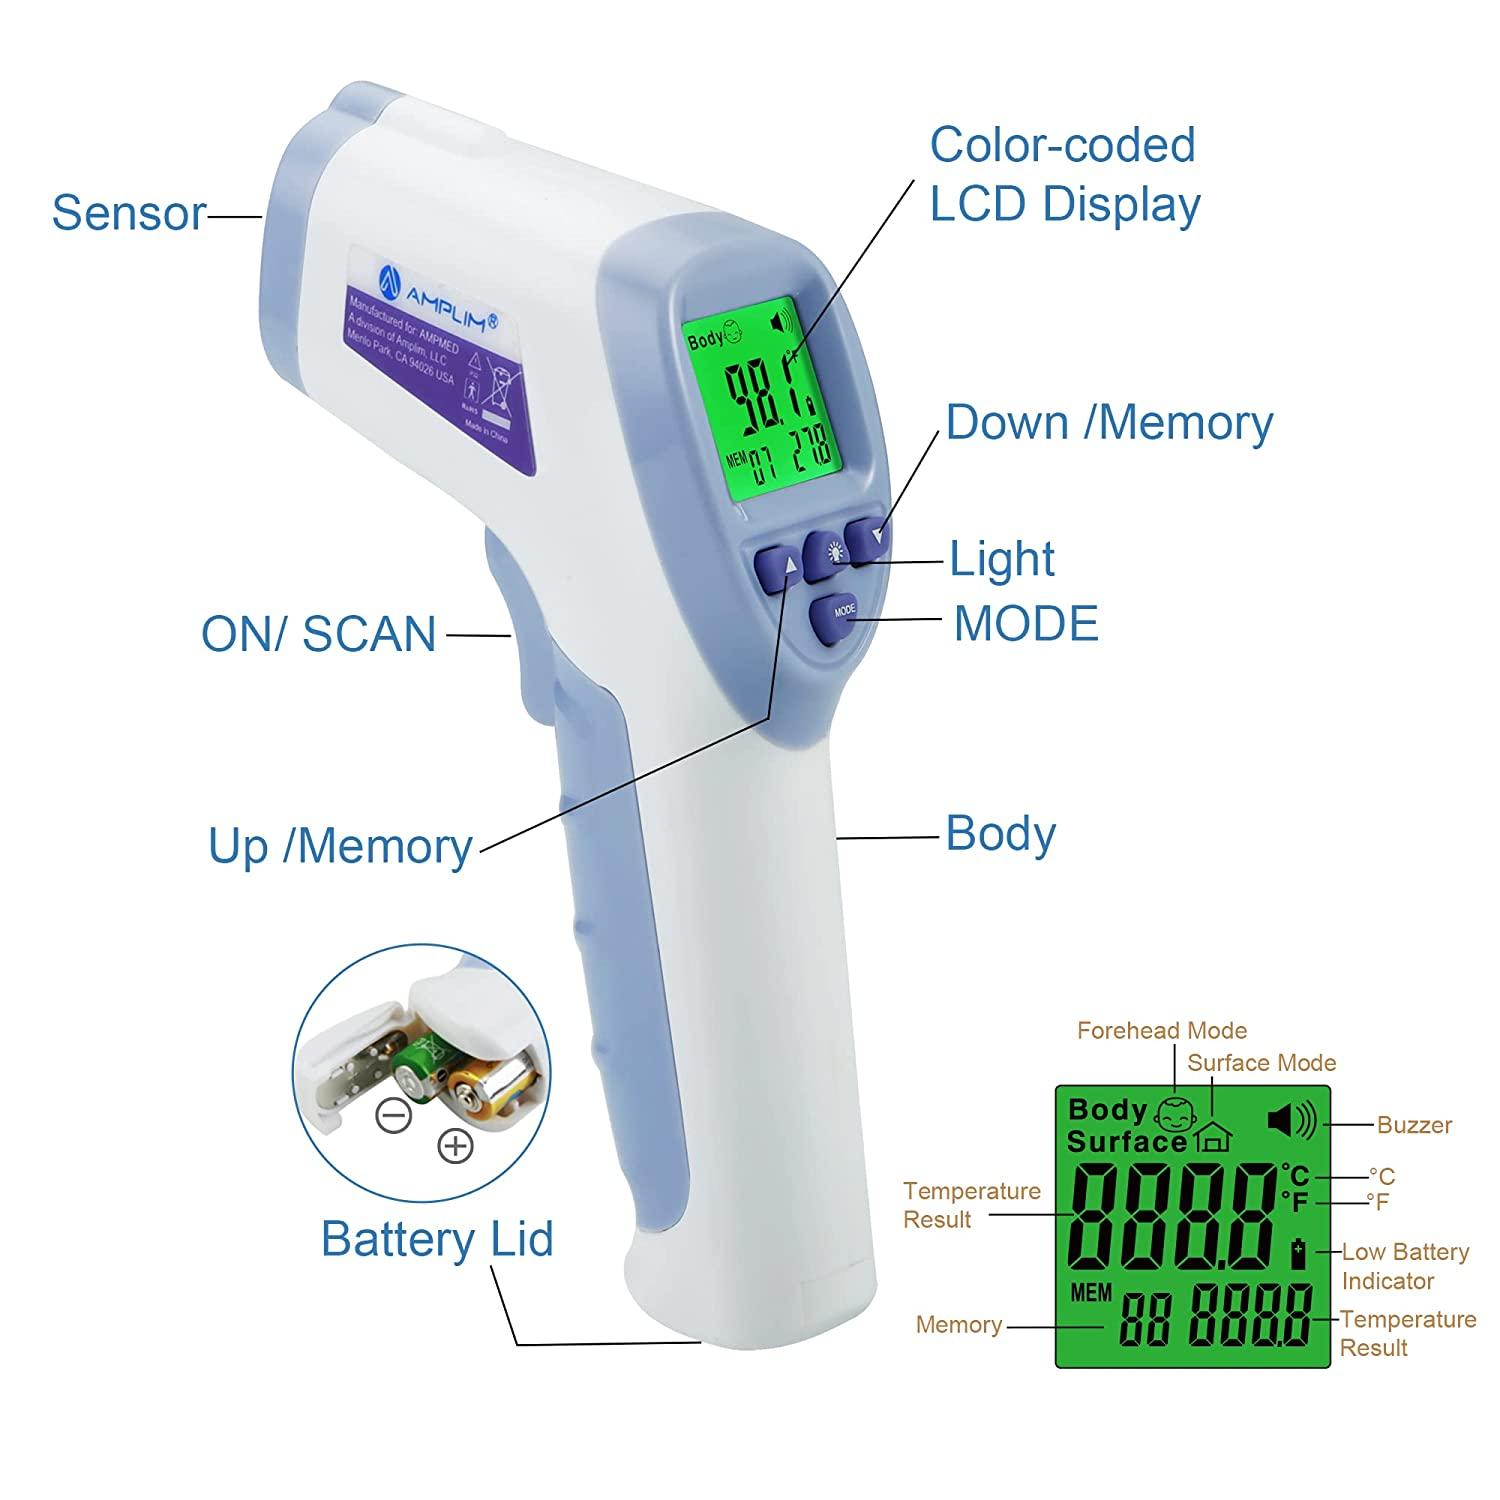 Amplim Non Contact Infrared Thermometer for Adults, Touchless